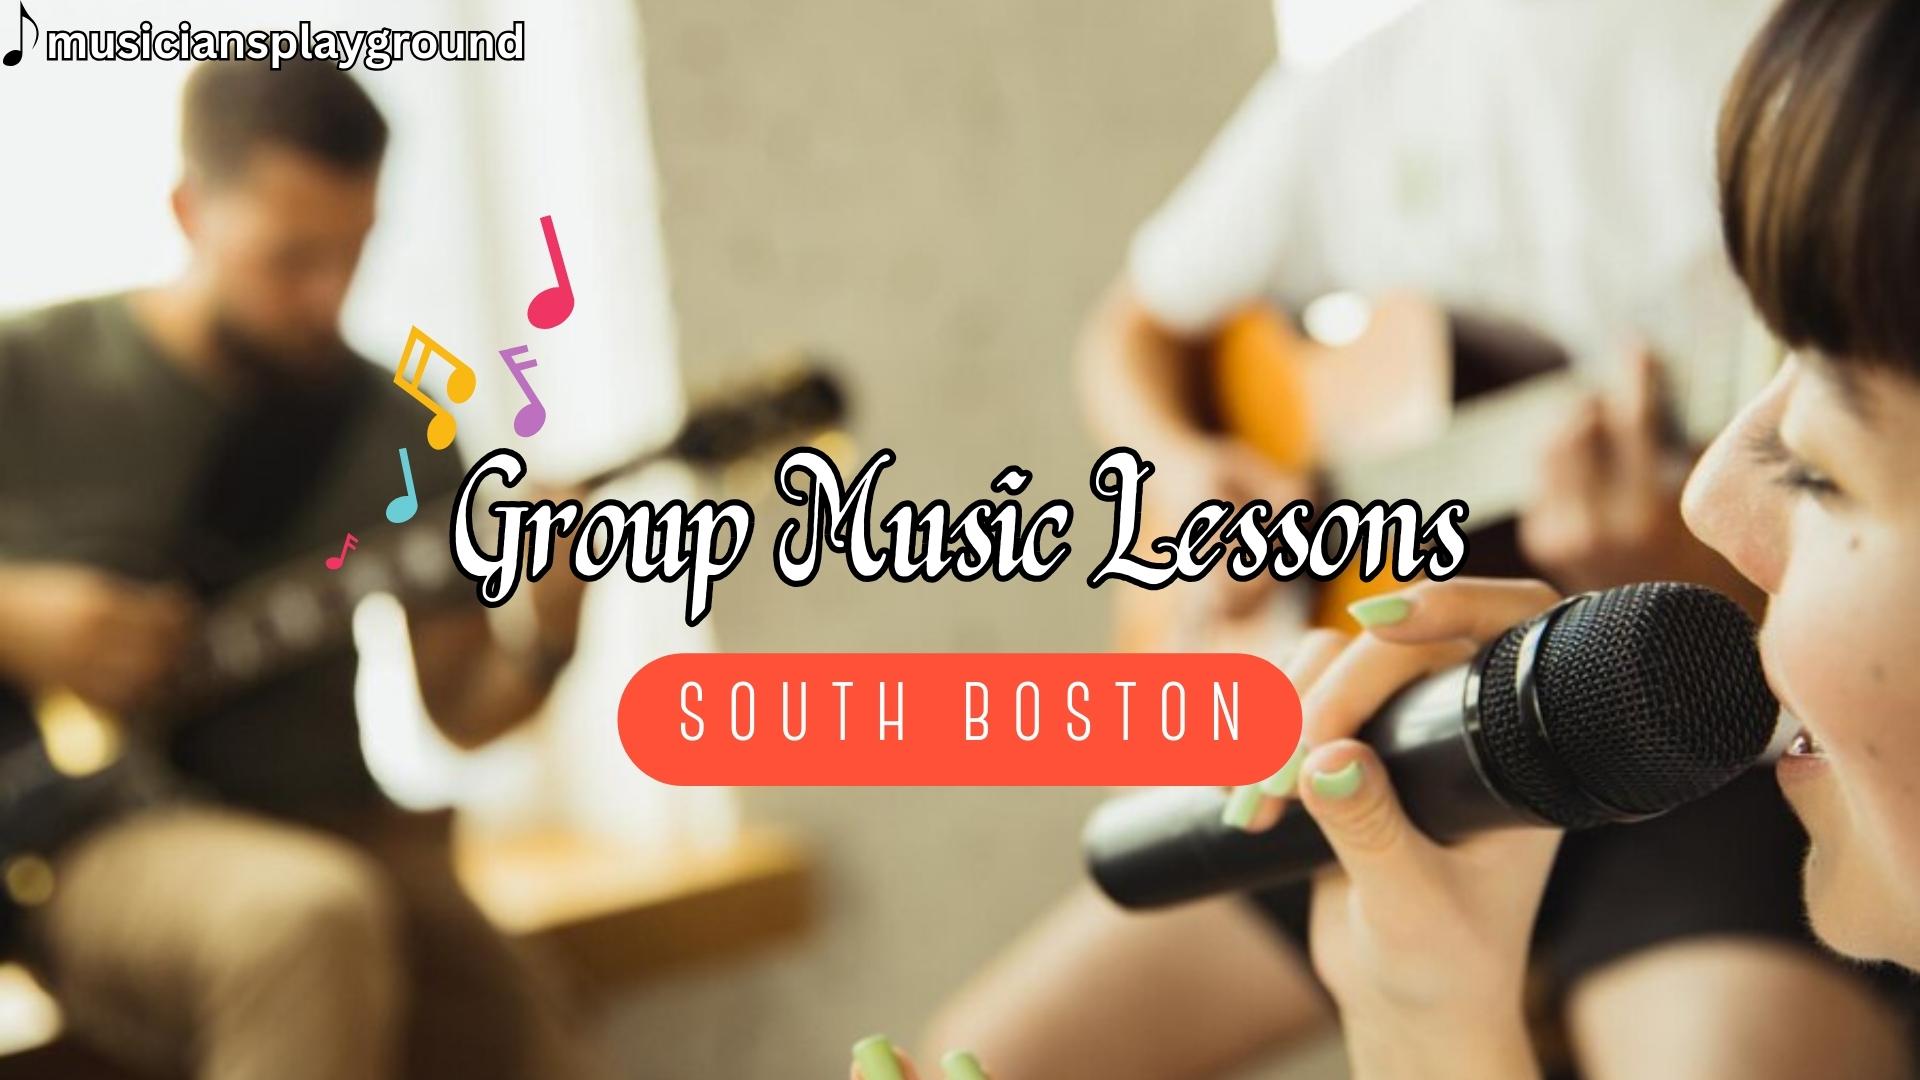 Group Music Lessons in South Boston, Massachusetts